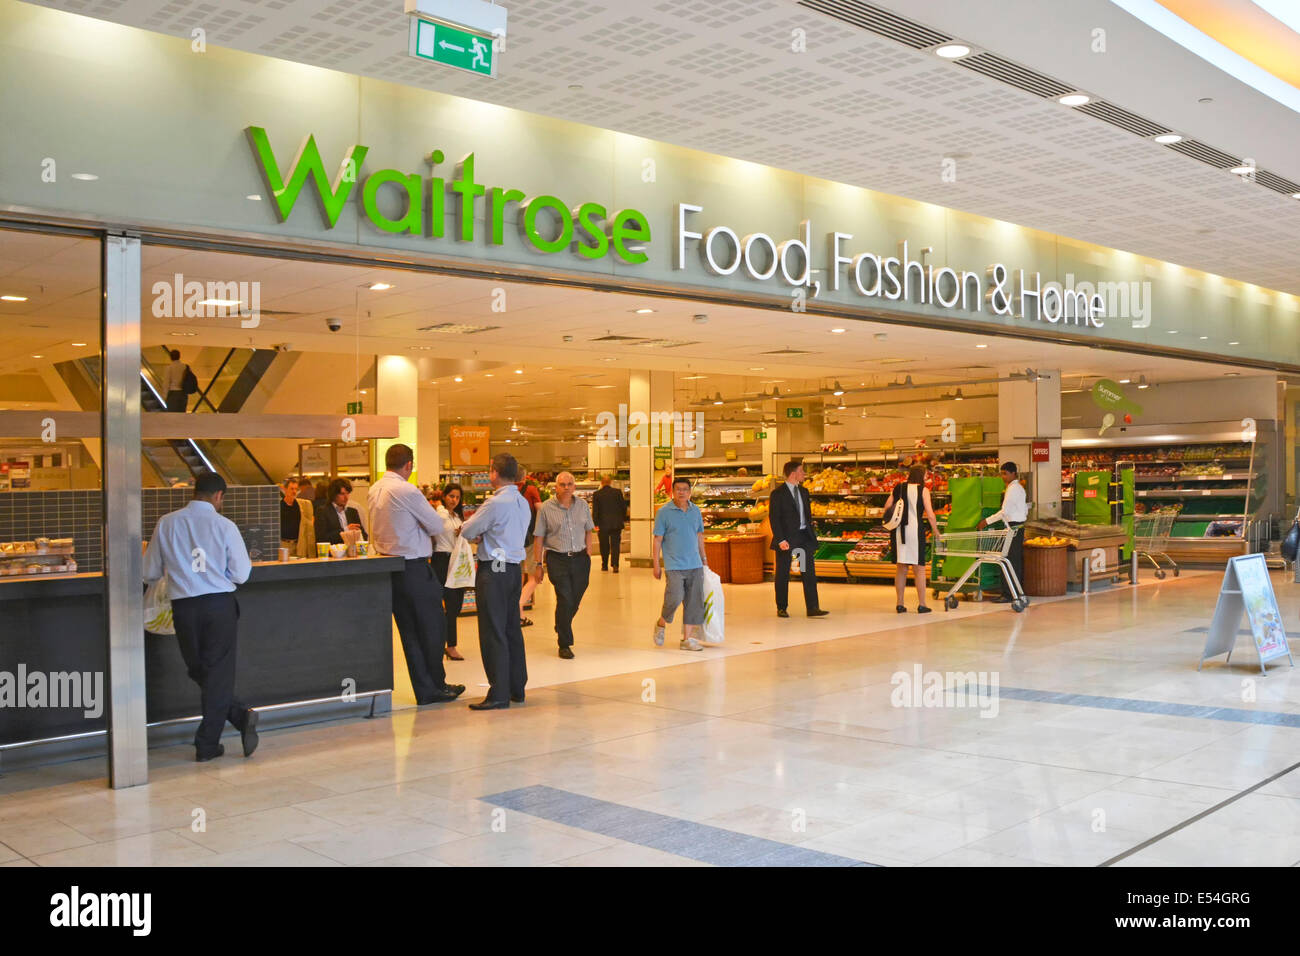 Waitrose food fashion & home store in London Docklands shopping mall catering for large concentration of office workers in Canary Wharf England UK Stock Photo